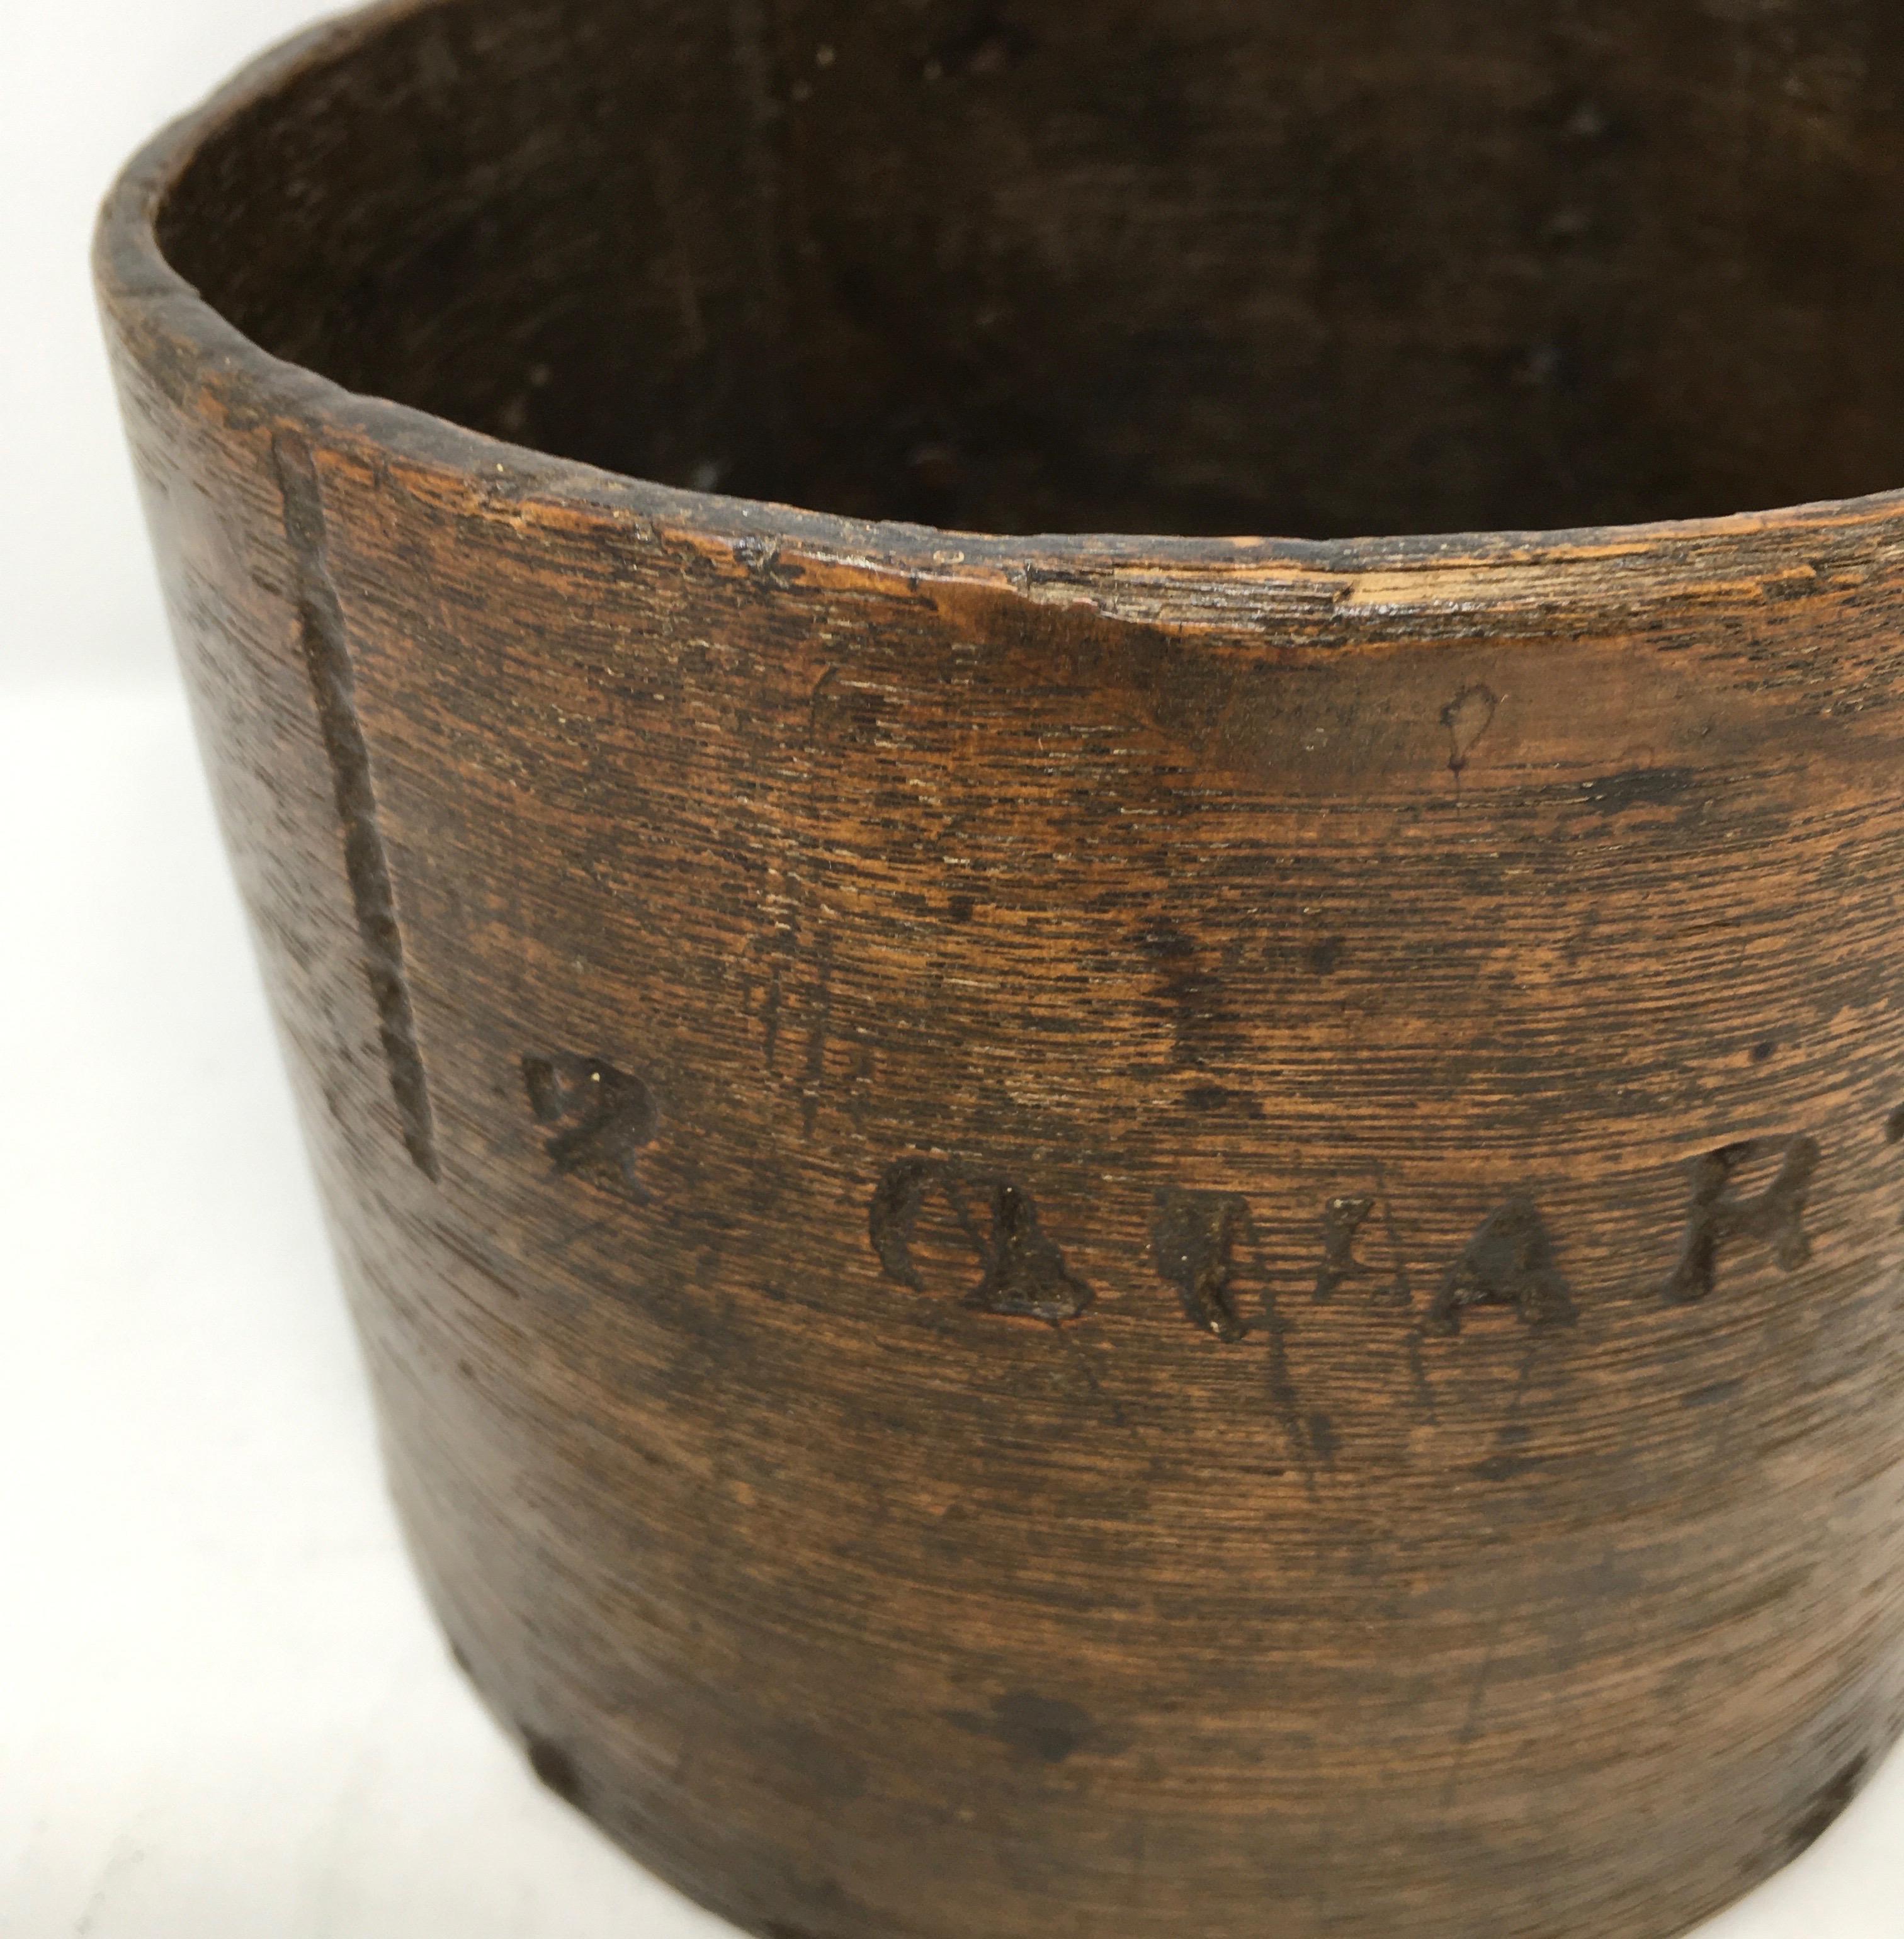 Found in England, this 19th century Primitive two quart grain measure is made with a single piece of wood bent into a barrel shape secured by tiny rivets around a round bottom piece of wood. The piece has fabulous aged wood patina and would be great